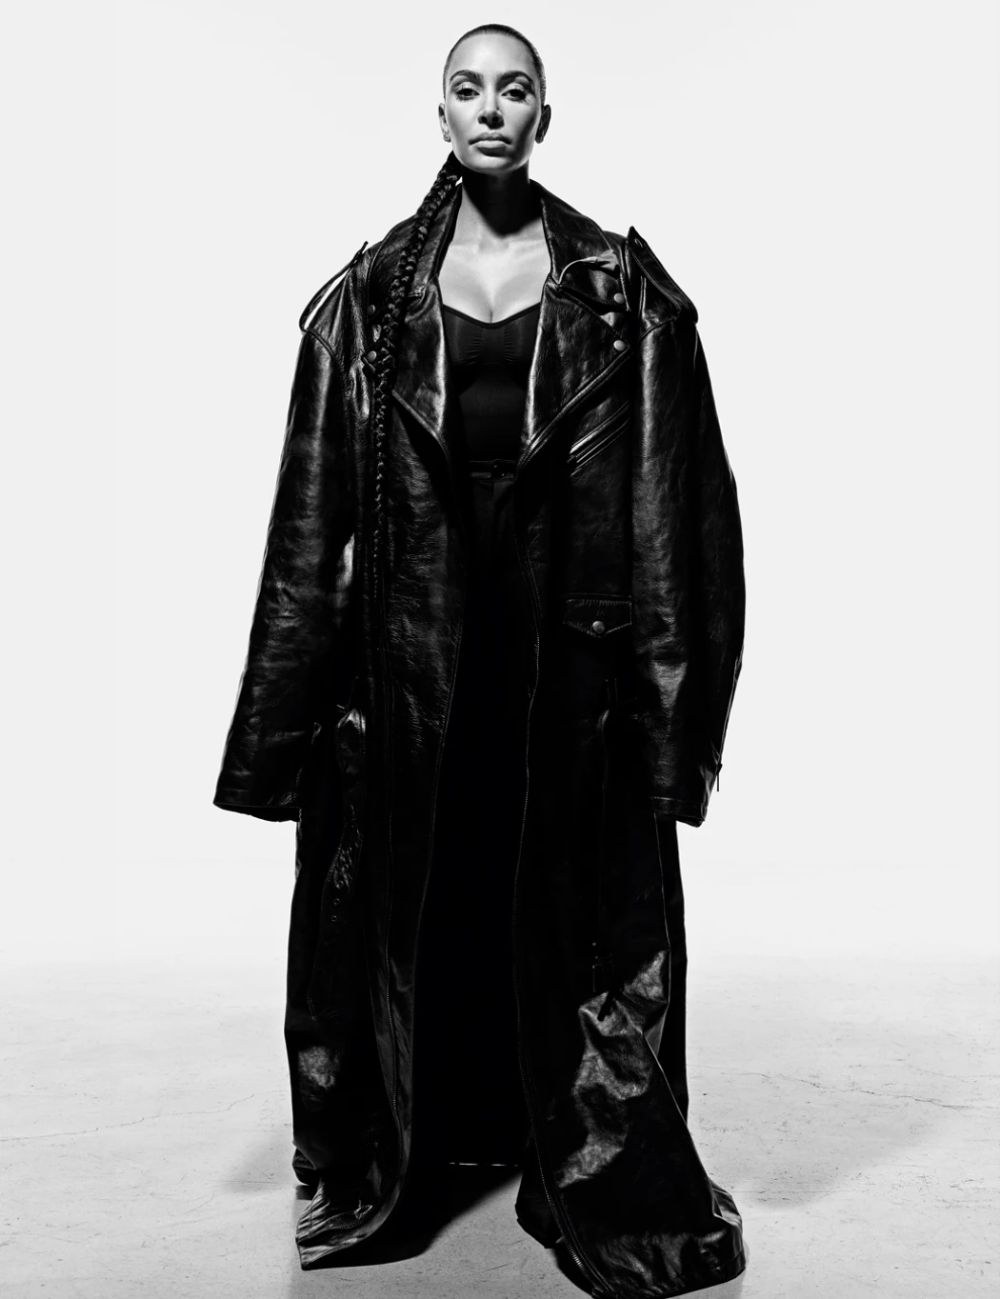 Kim Kardashian West by Mario Sorrenti for i-D Magazine Winter 2021 Clothing & Jewelry: Coat and Pantashoes by Balenciaga; Top by Skims; All Jewelry by Tiffany & Co. 